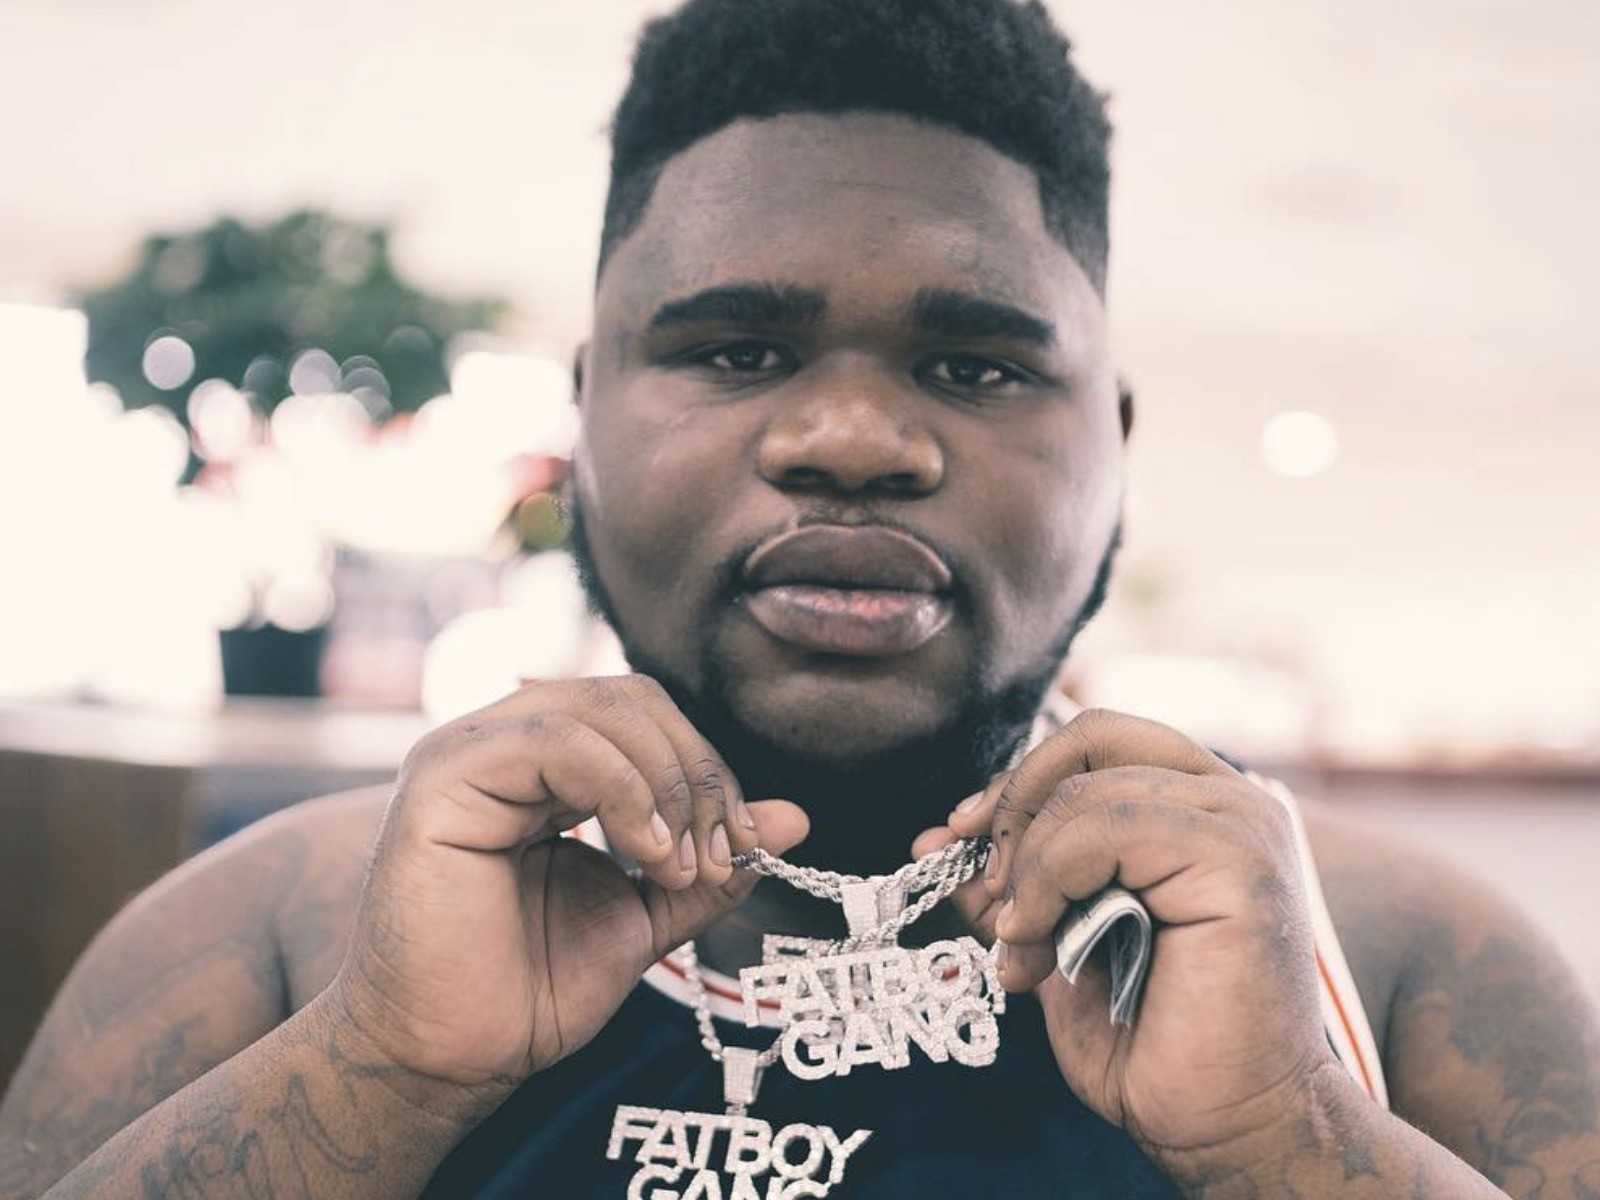 charlene mcdermott recommends fatboy sse net worth pic